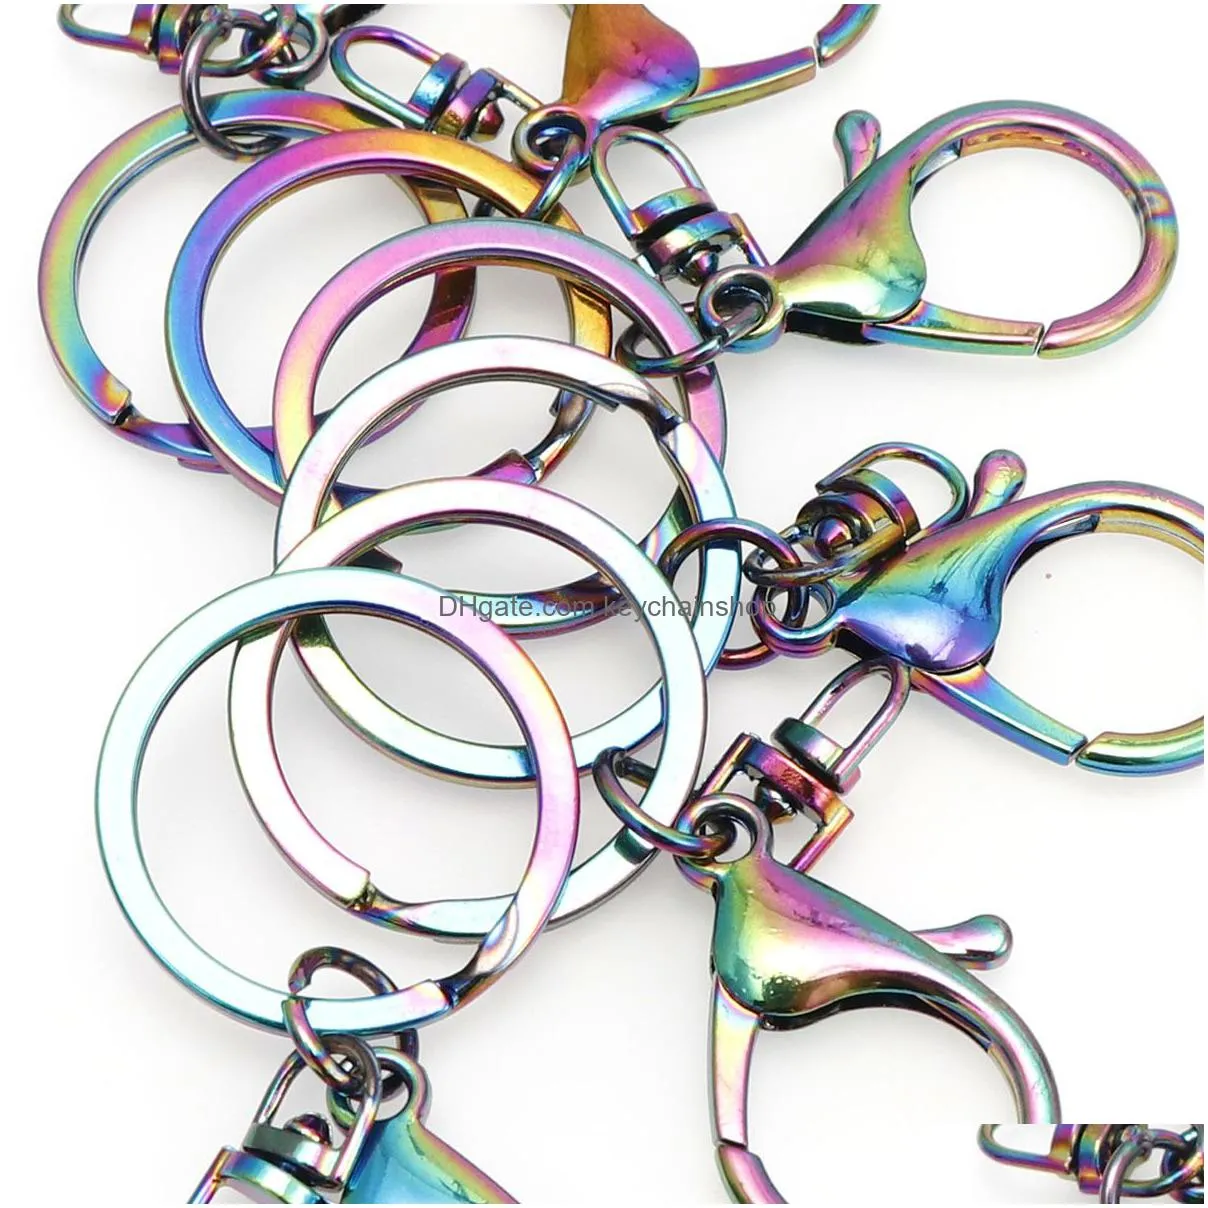 Chromatic Rainbow Keychains Metal Key Chain Ring Split Rings Uni Keyring Holder Accessories Drop Delivery Dhjld